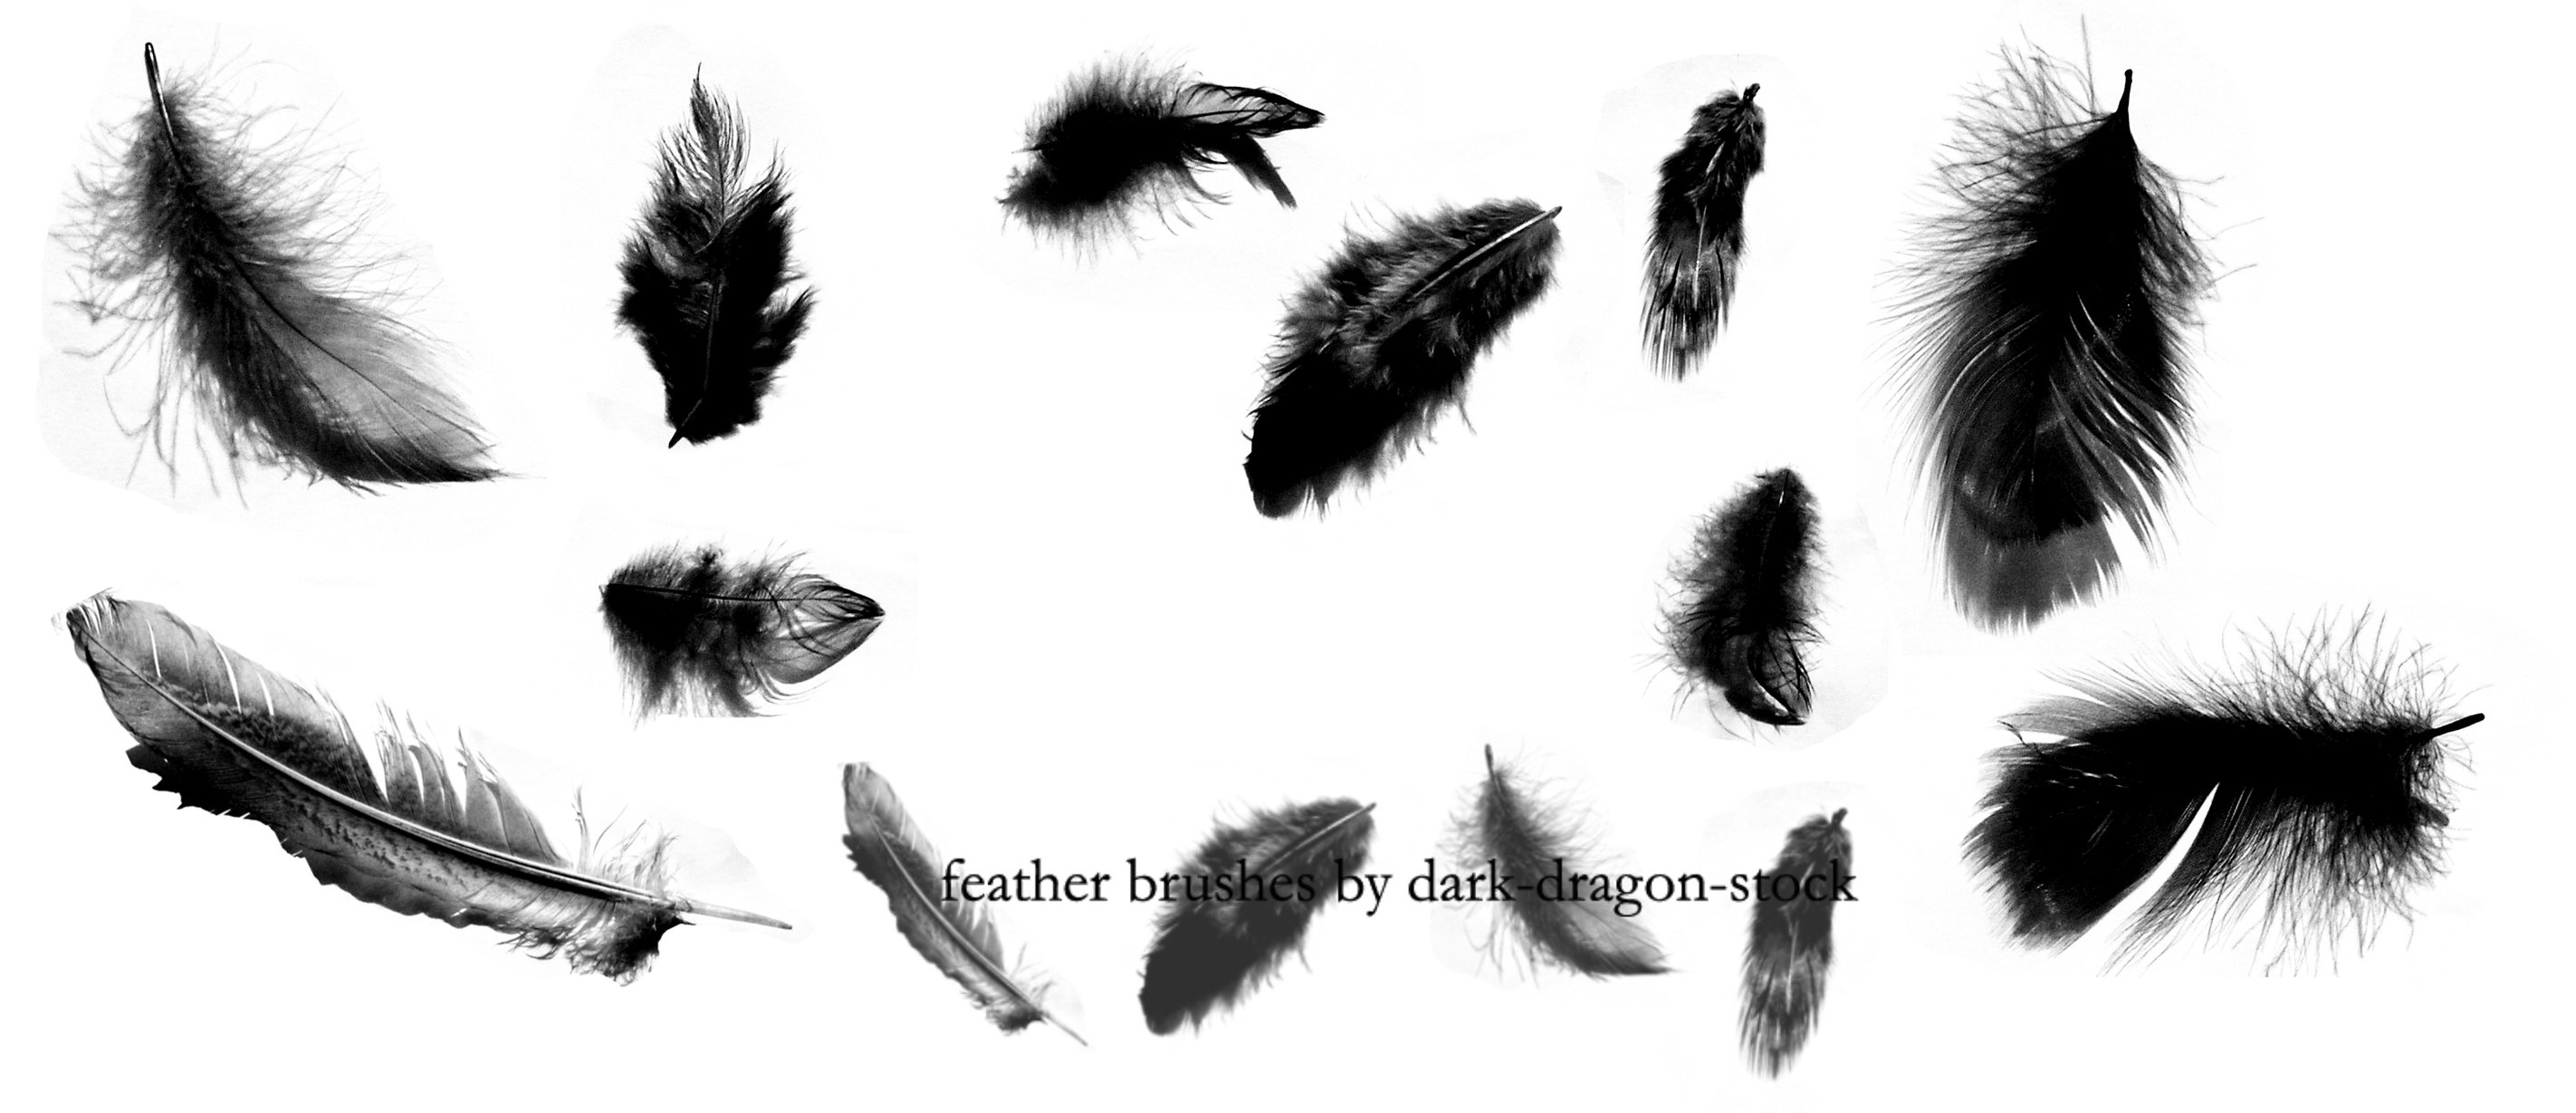 feather brushes by dark-dragon-stock on DeviantArt